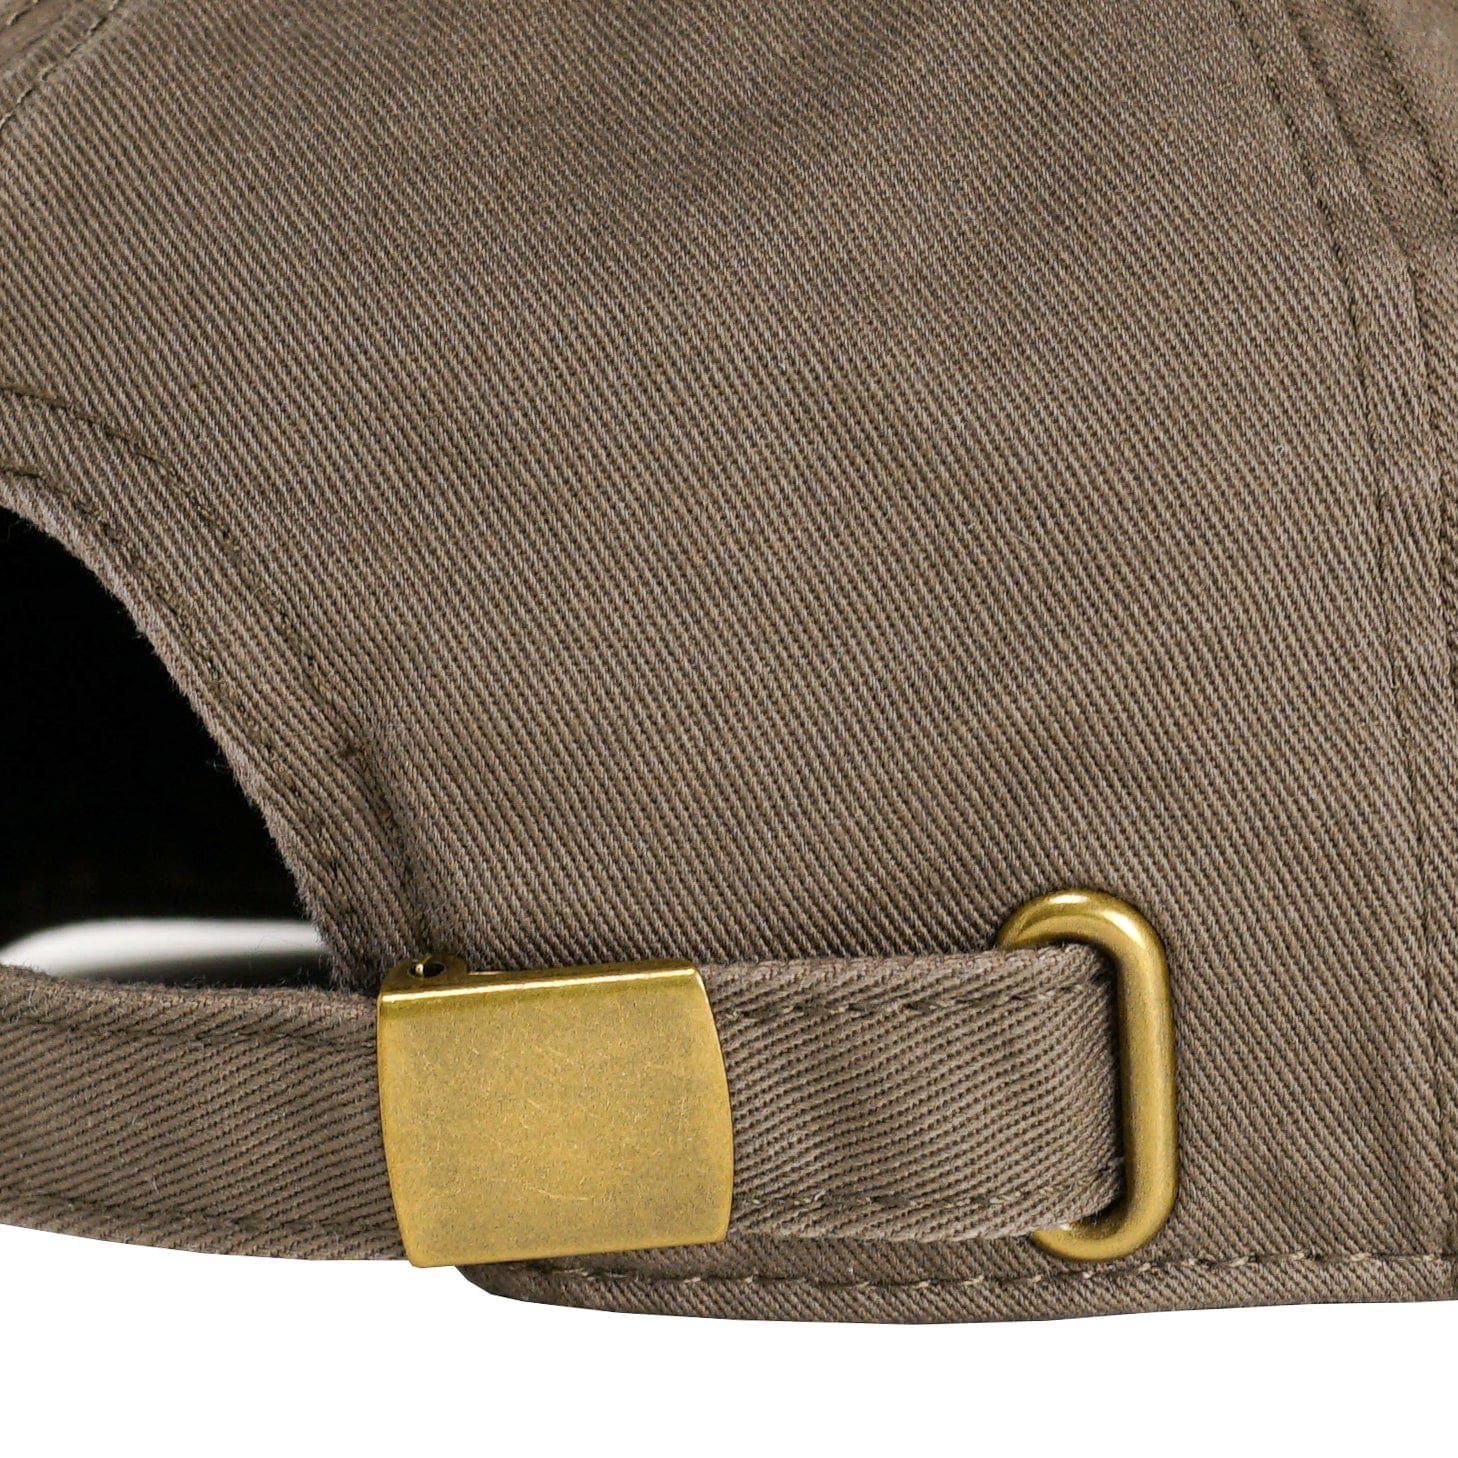 SOF Good Energy Club Classic Cap in walnut - State Of Flux - State Of Flux